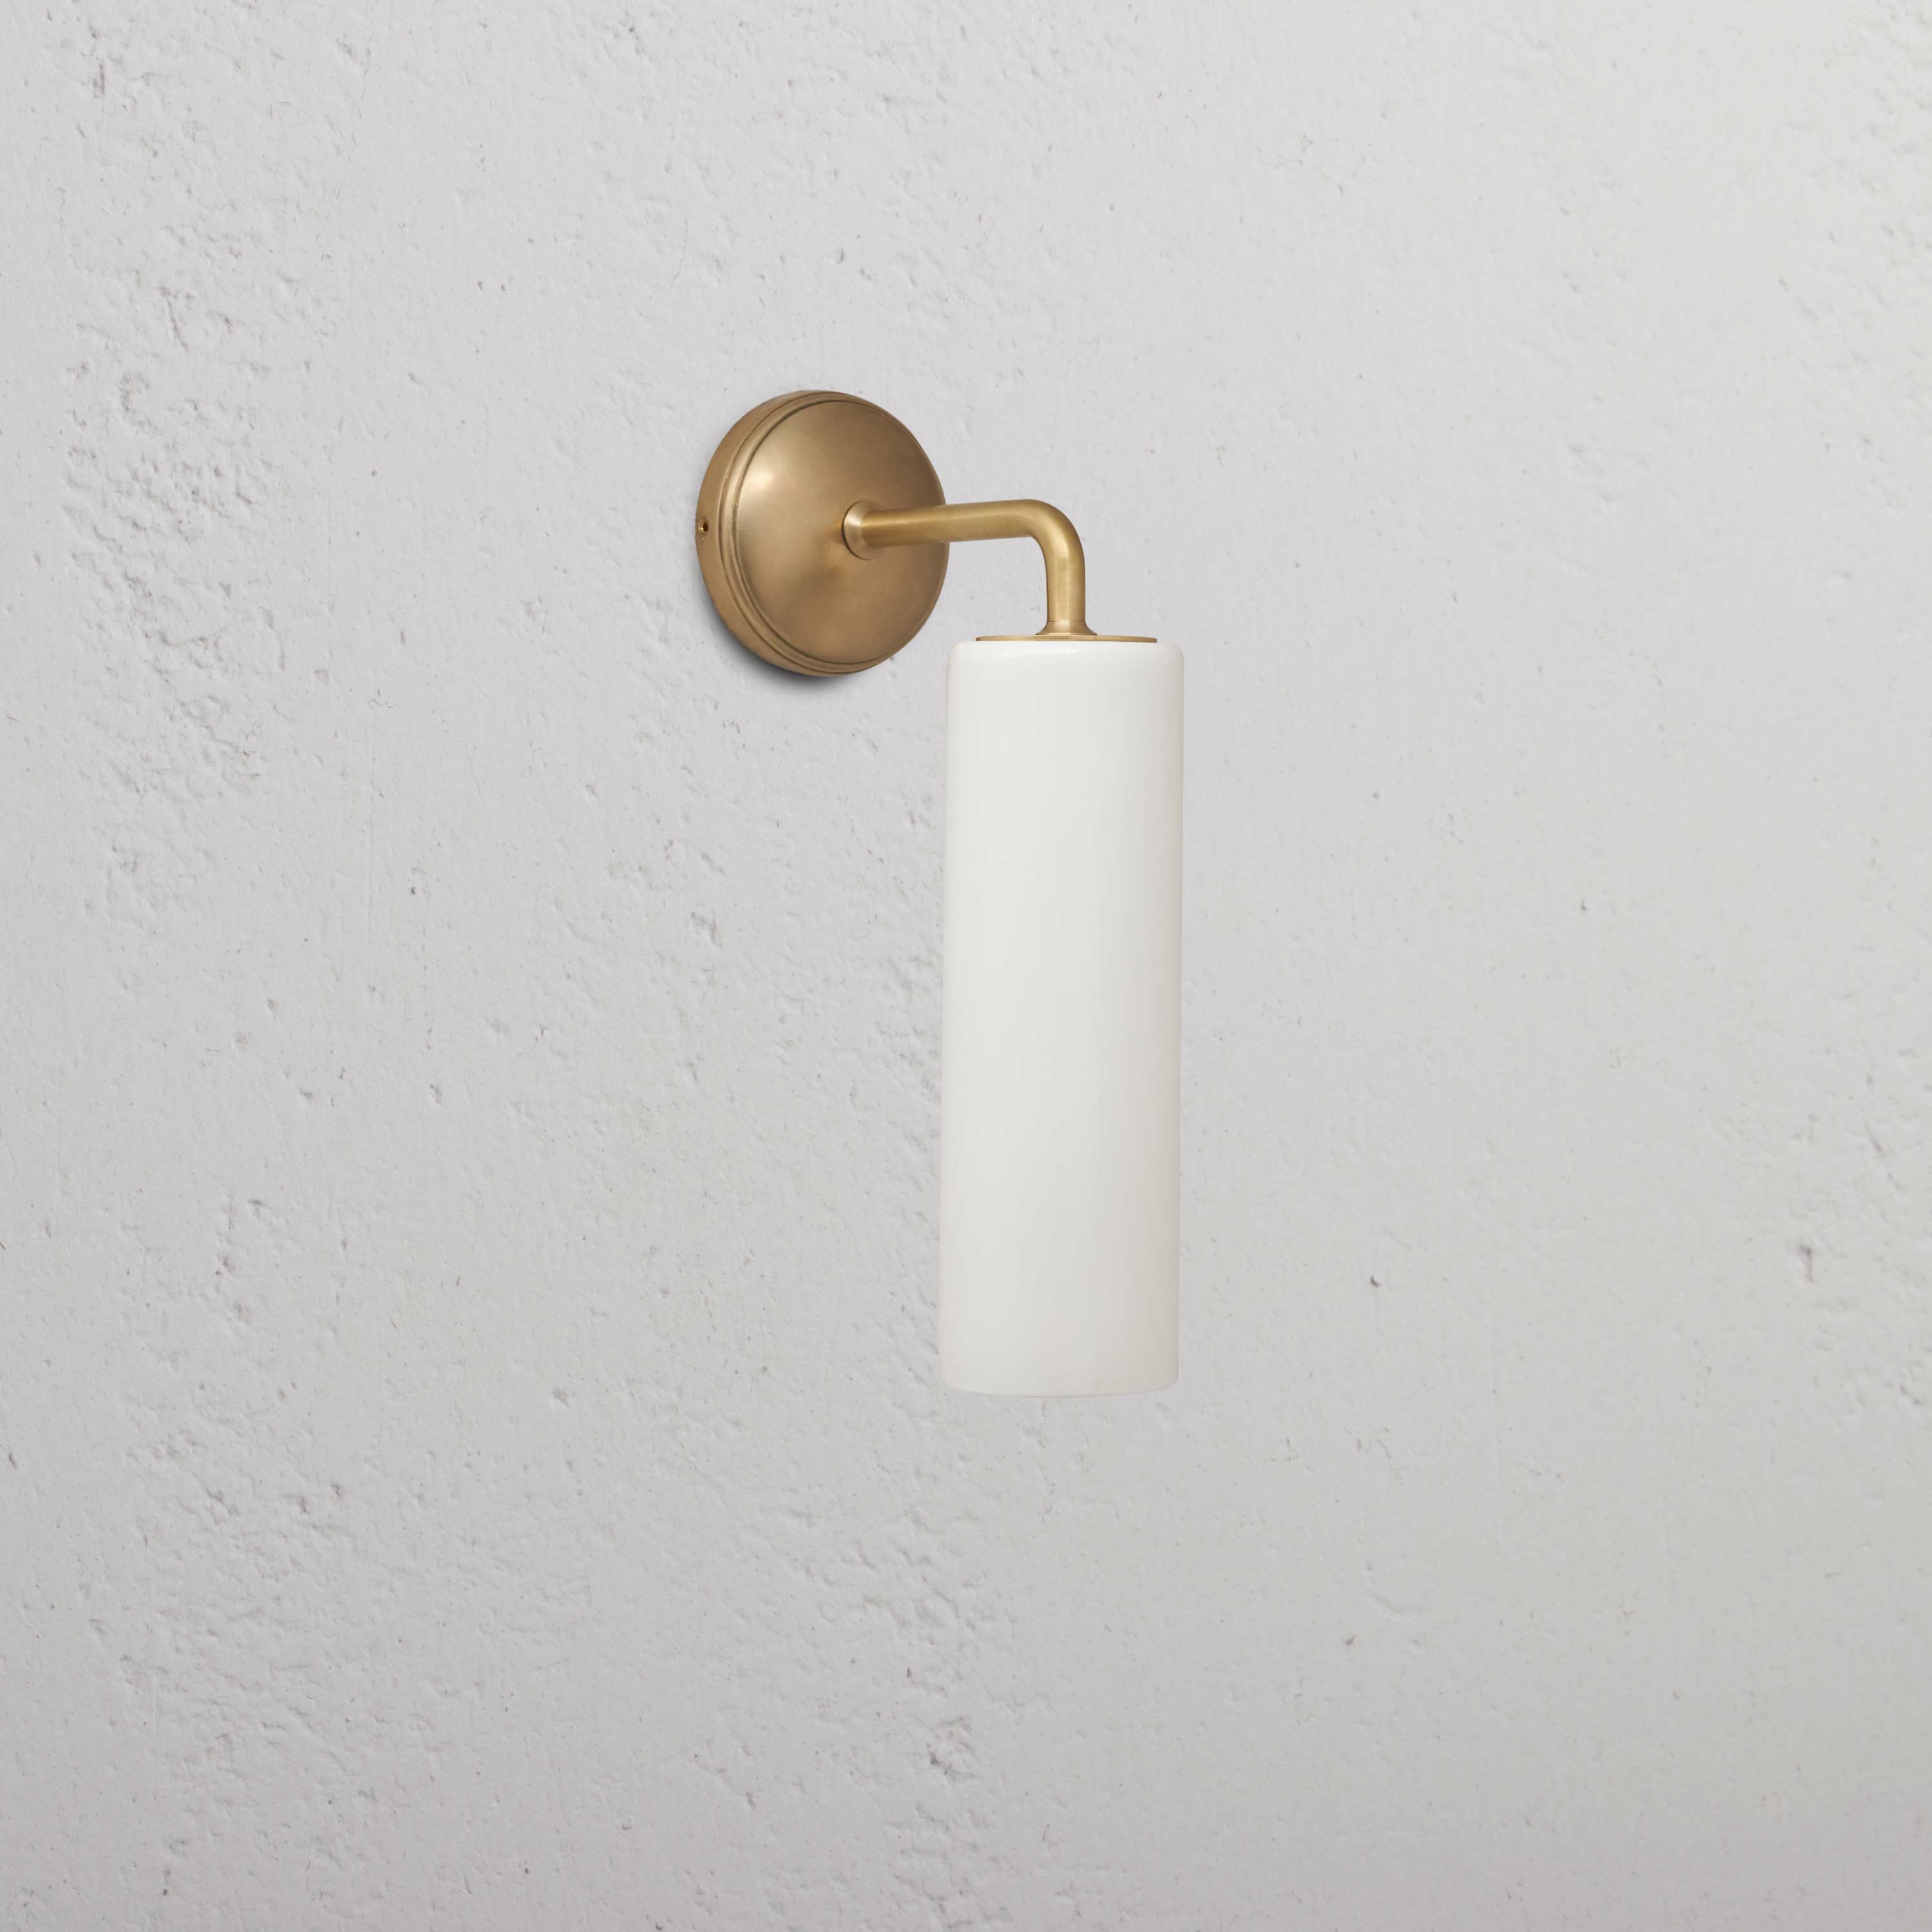 Antique Brass Wall Light with Fine Porcelain Shade